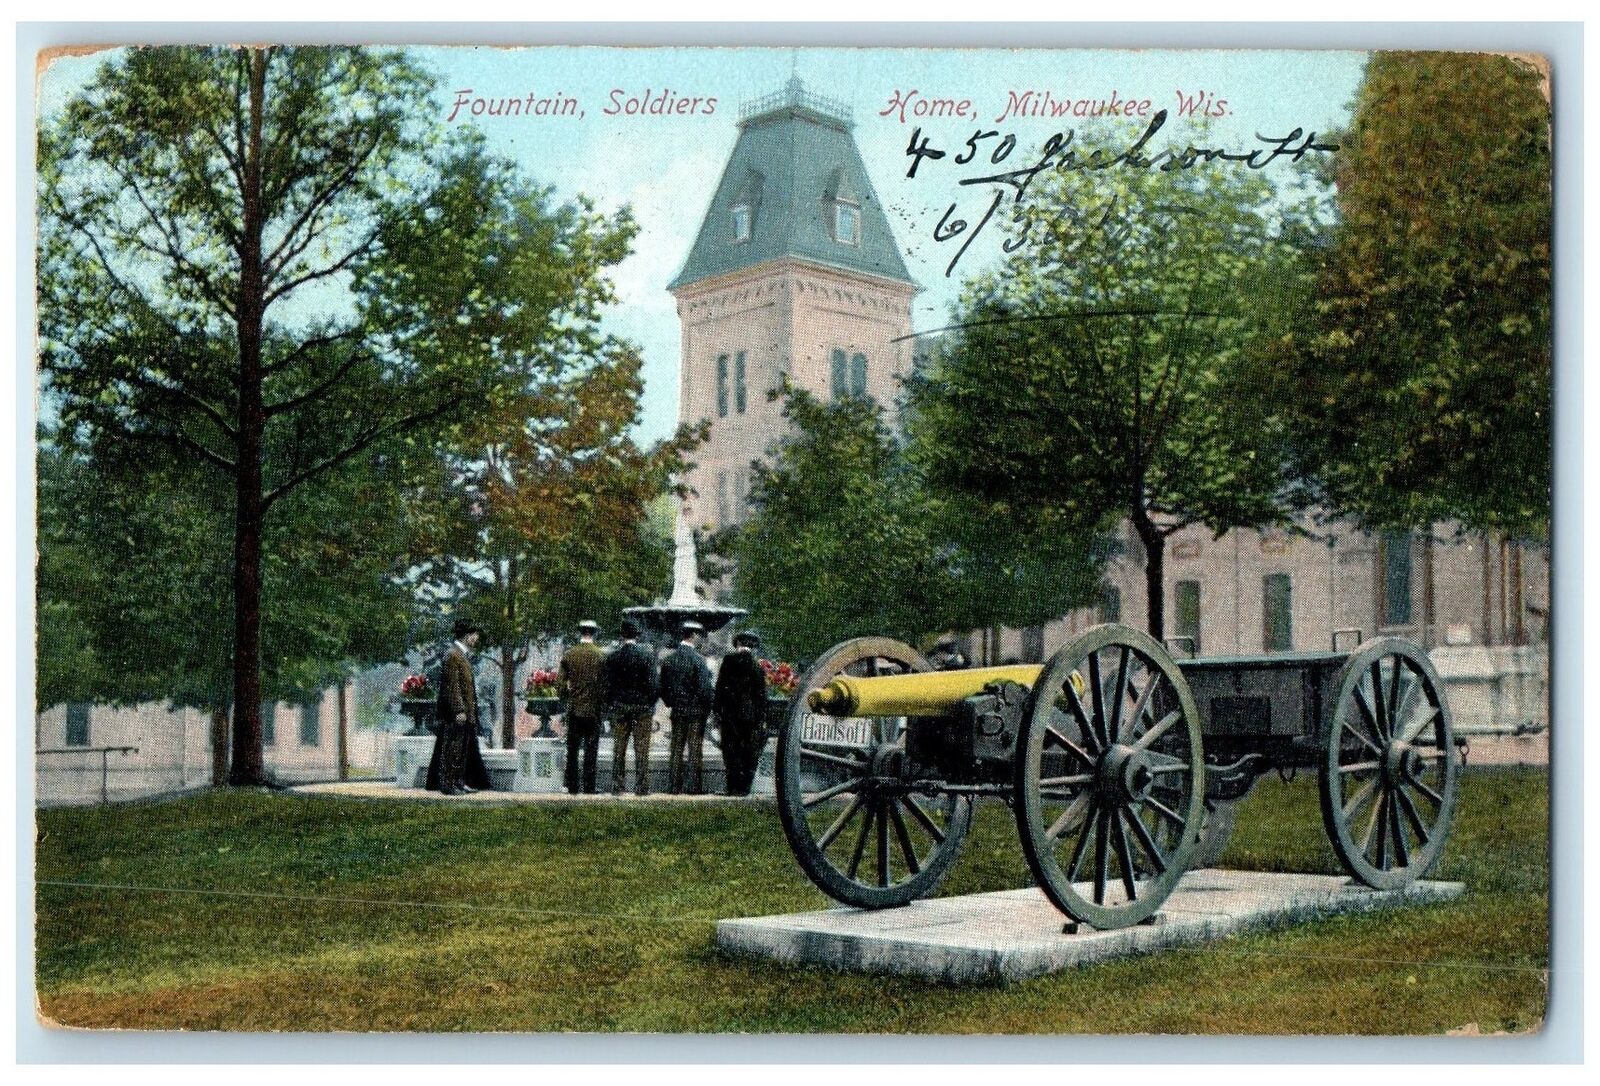 1908 Fountain Soldiers Home Park Cannon Tower View Milwaukee Wisconsin Postcard